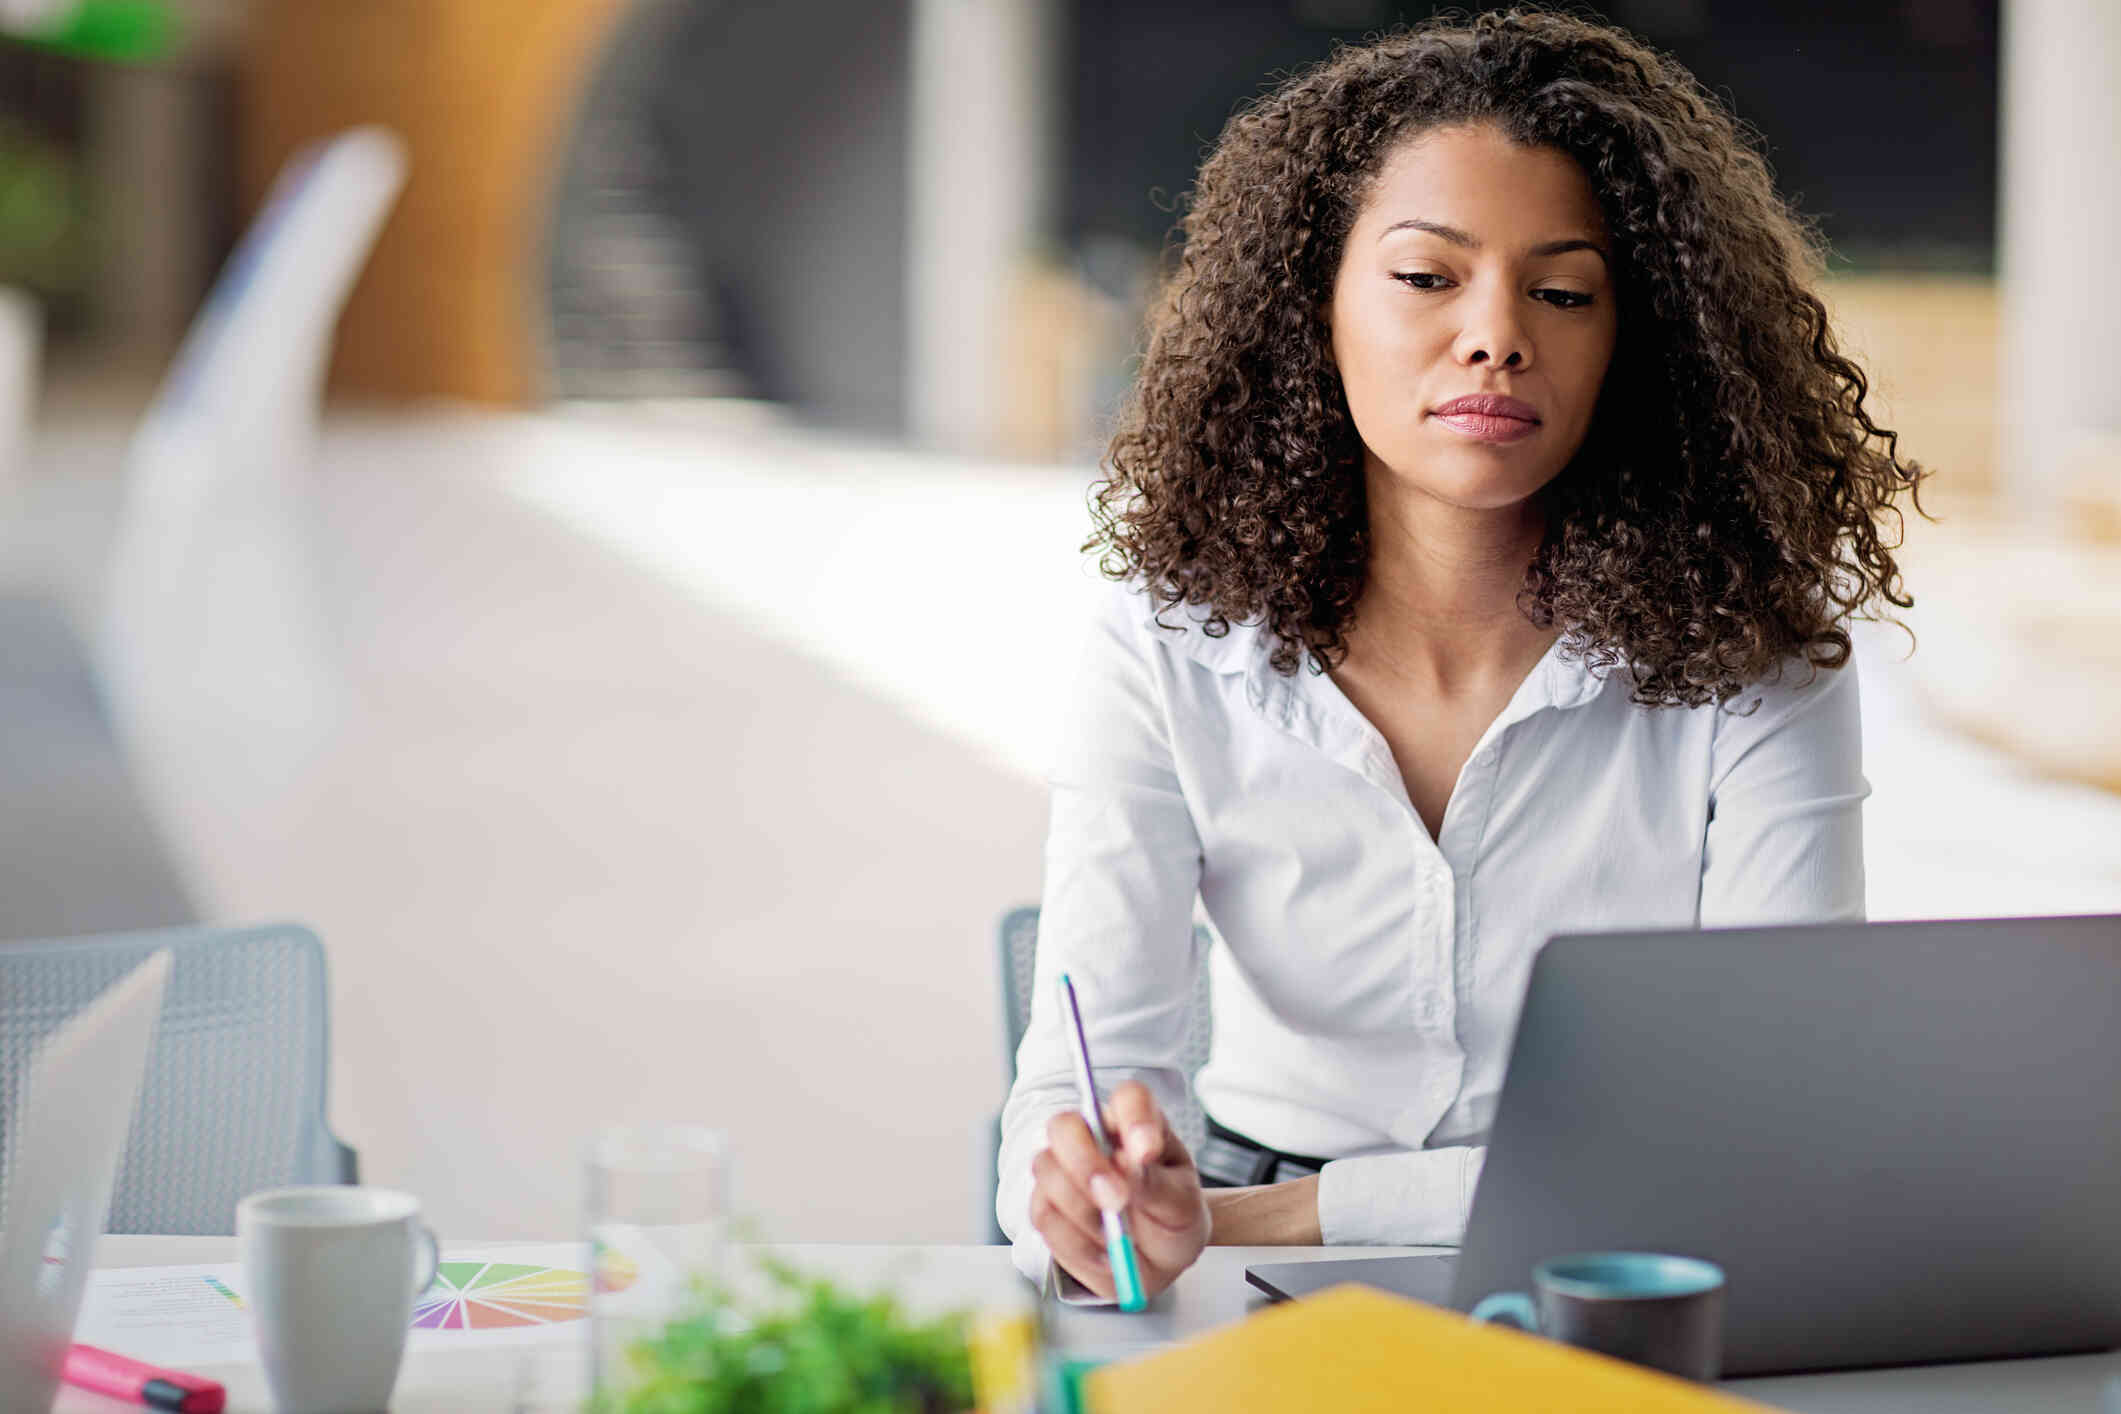 A woman in a white buttin down shirt sits at a table with her laptop and gazes off while deep in thought.